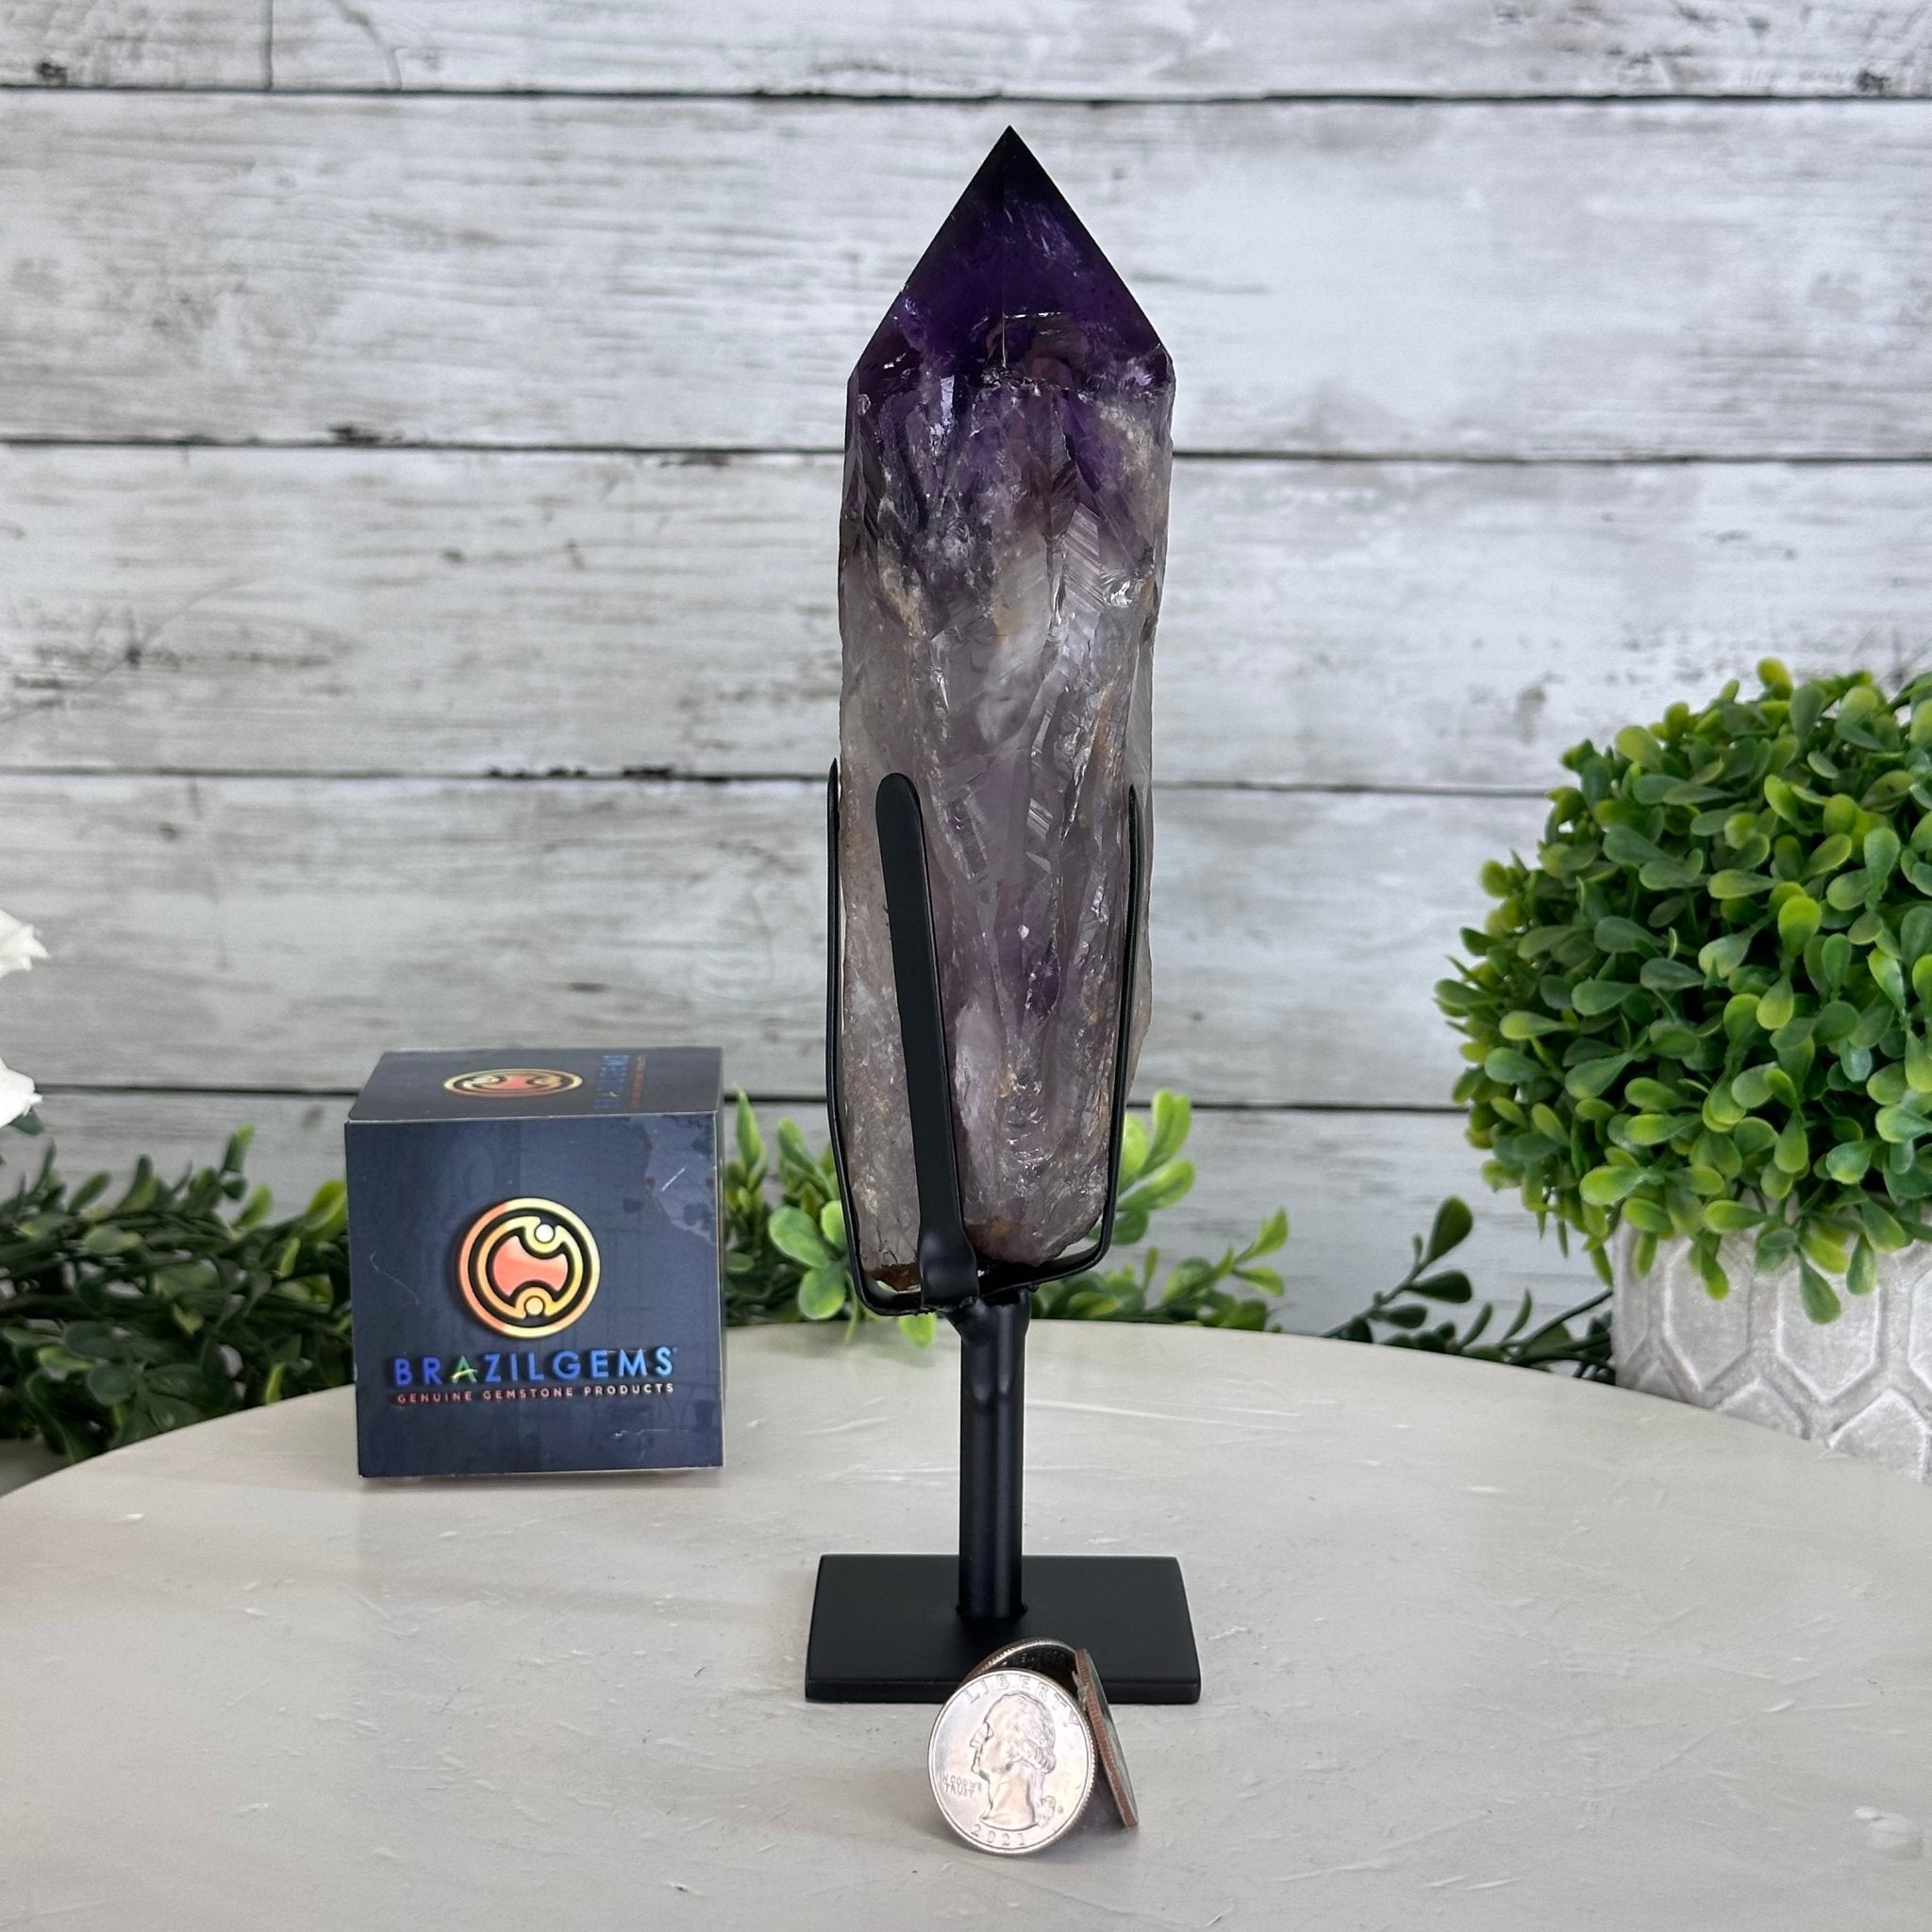 Super Quality Amethyst Wand on a Metal Stand, 1.7 lbs & 9" Tall #3123AM-003 - Brazil GemsBrazil GemsSuper Quality Amethyst Wand on a Metal Stand, 1.7 lbs & 9" Tall #3123AM-003Clusters on Fixed Bases3123AM-003